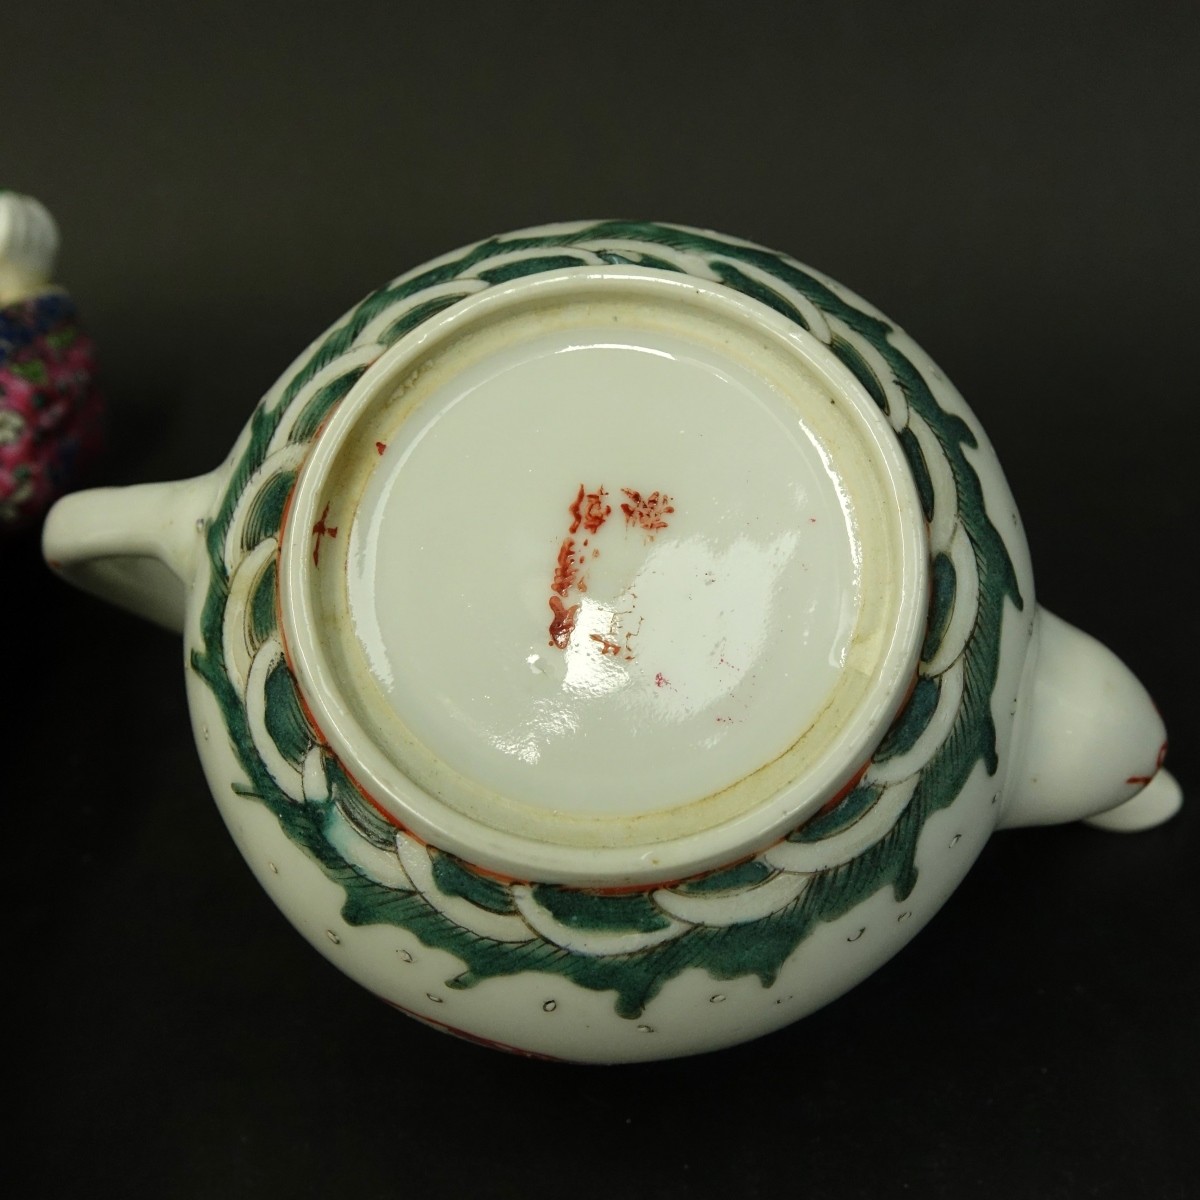 Three (3) Chinese Export Porcelain Tableware